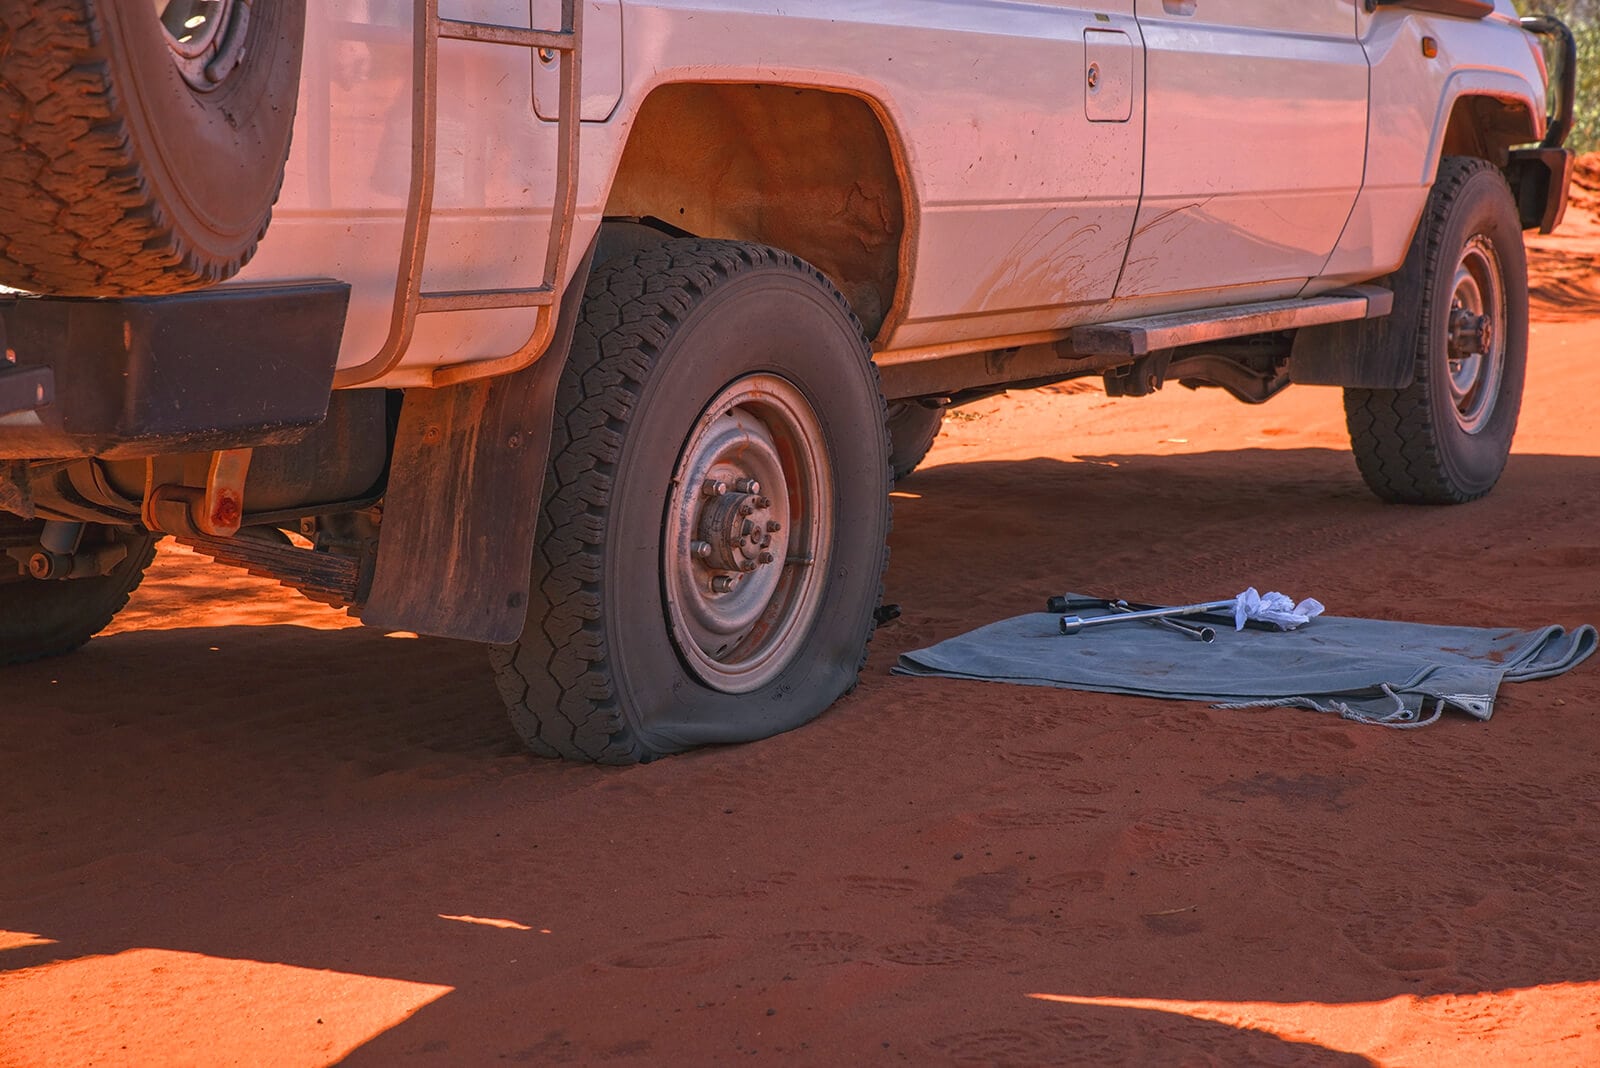 All wheel drive has flat tire in outback preparing to use Fix A Flat